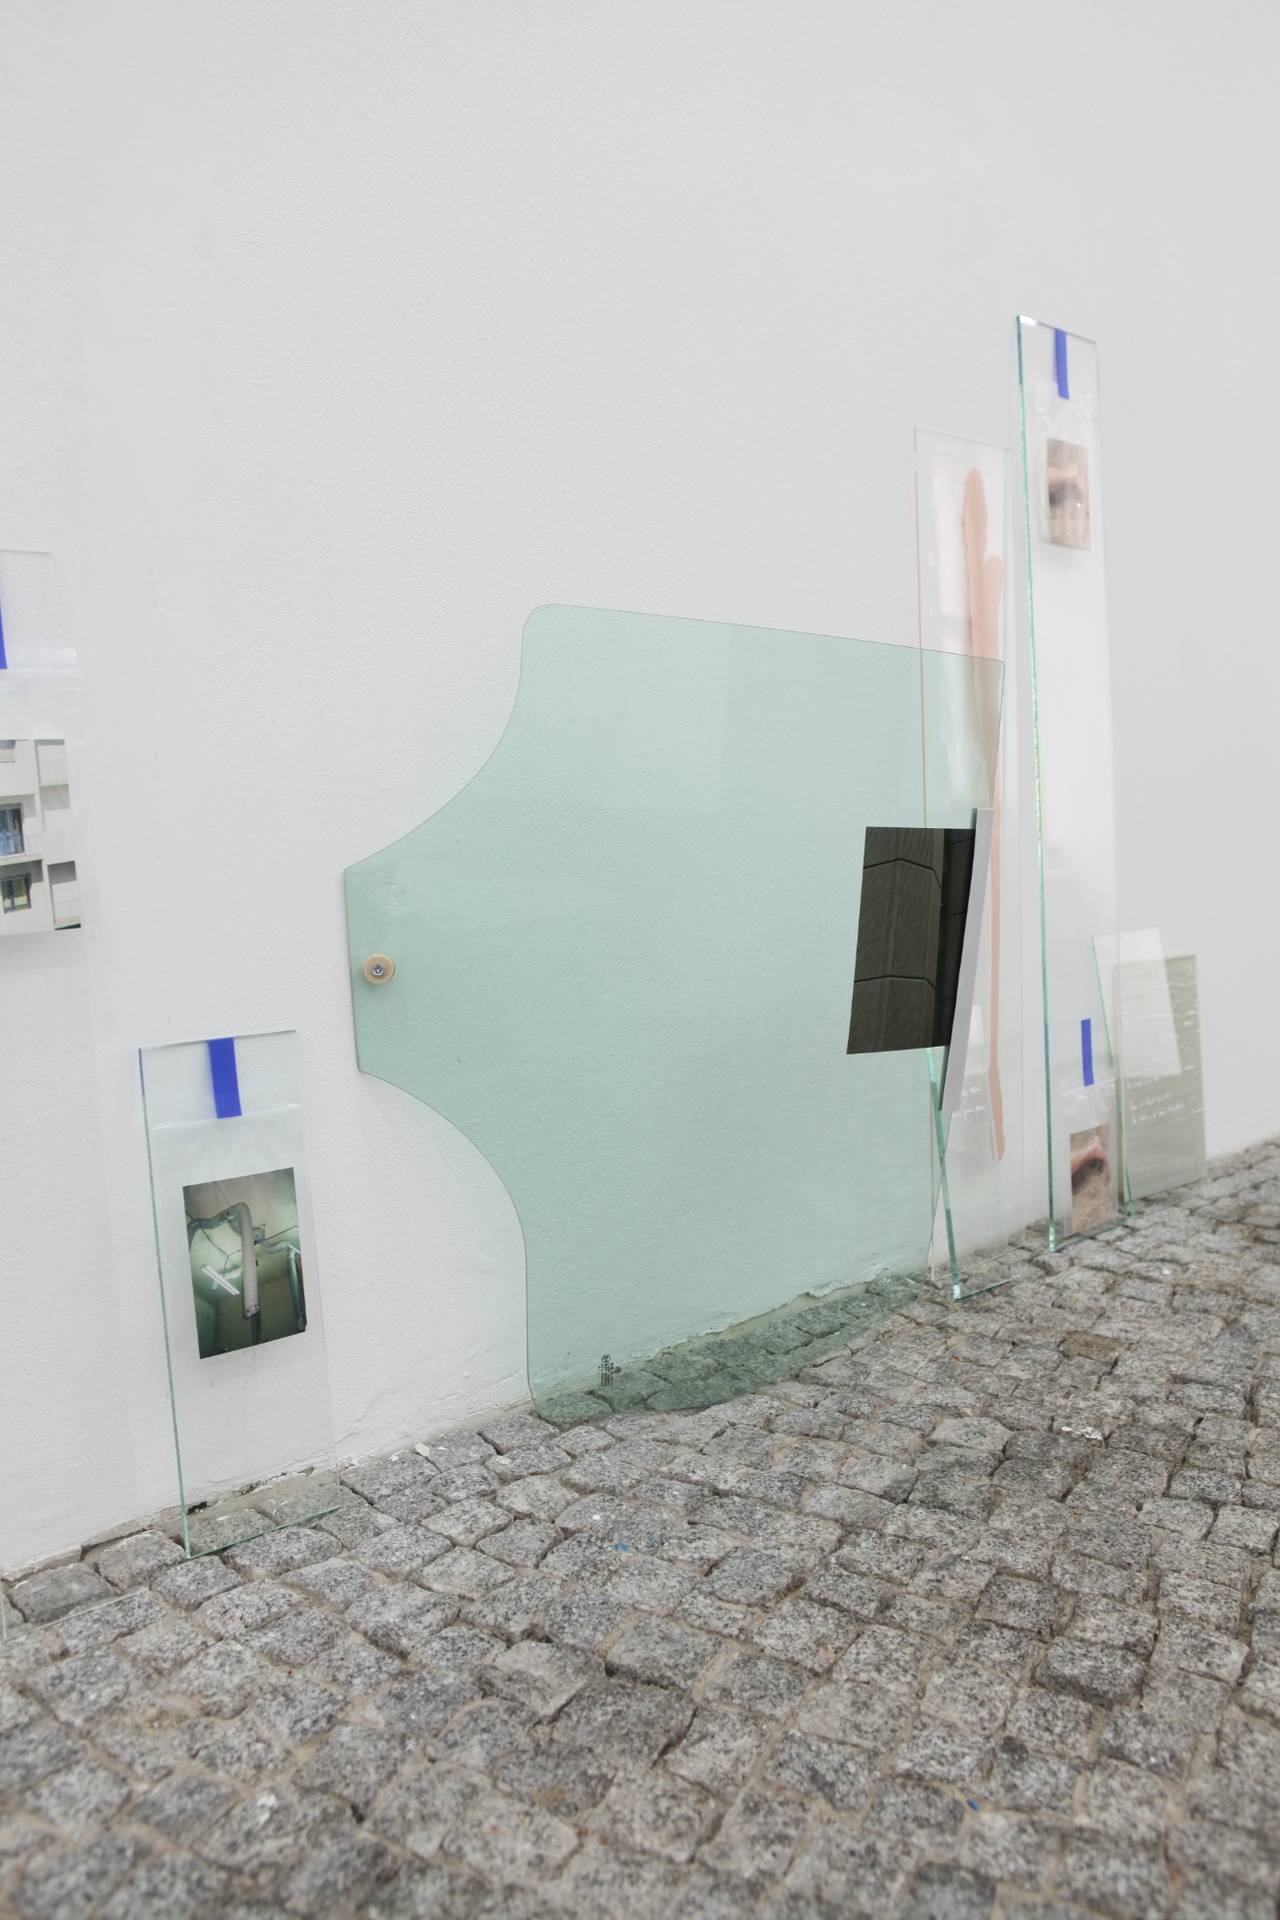 Marina Stanimirovic, MORCELLEMENT, 2021, variable dimensions, silicone rubber, glass, analog photographs